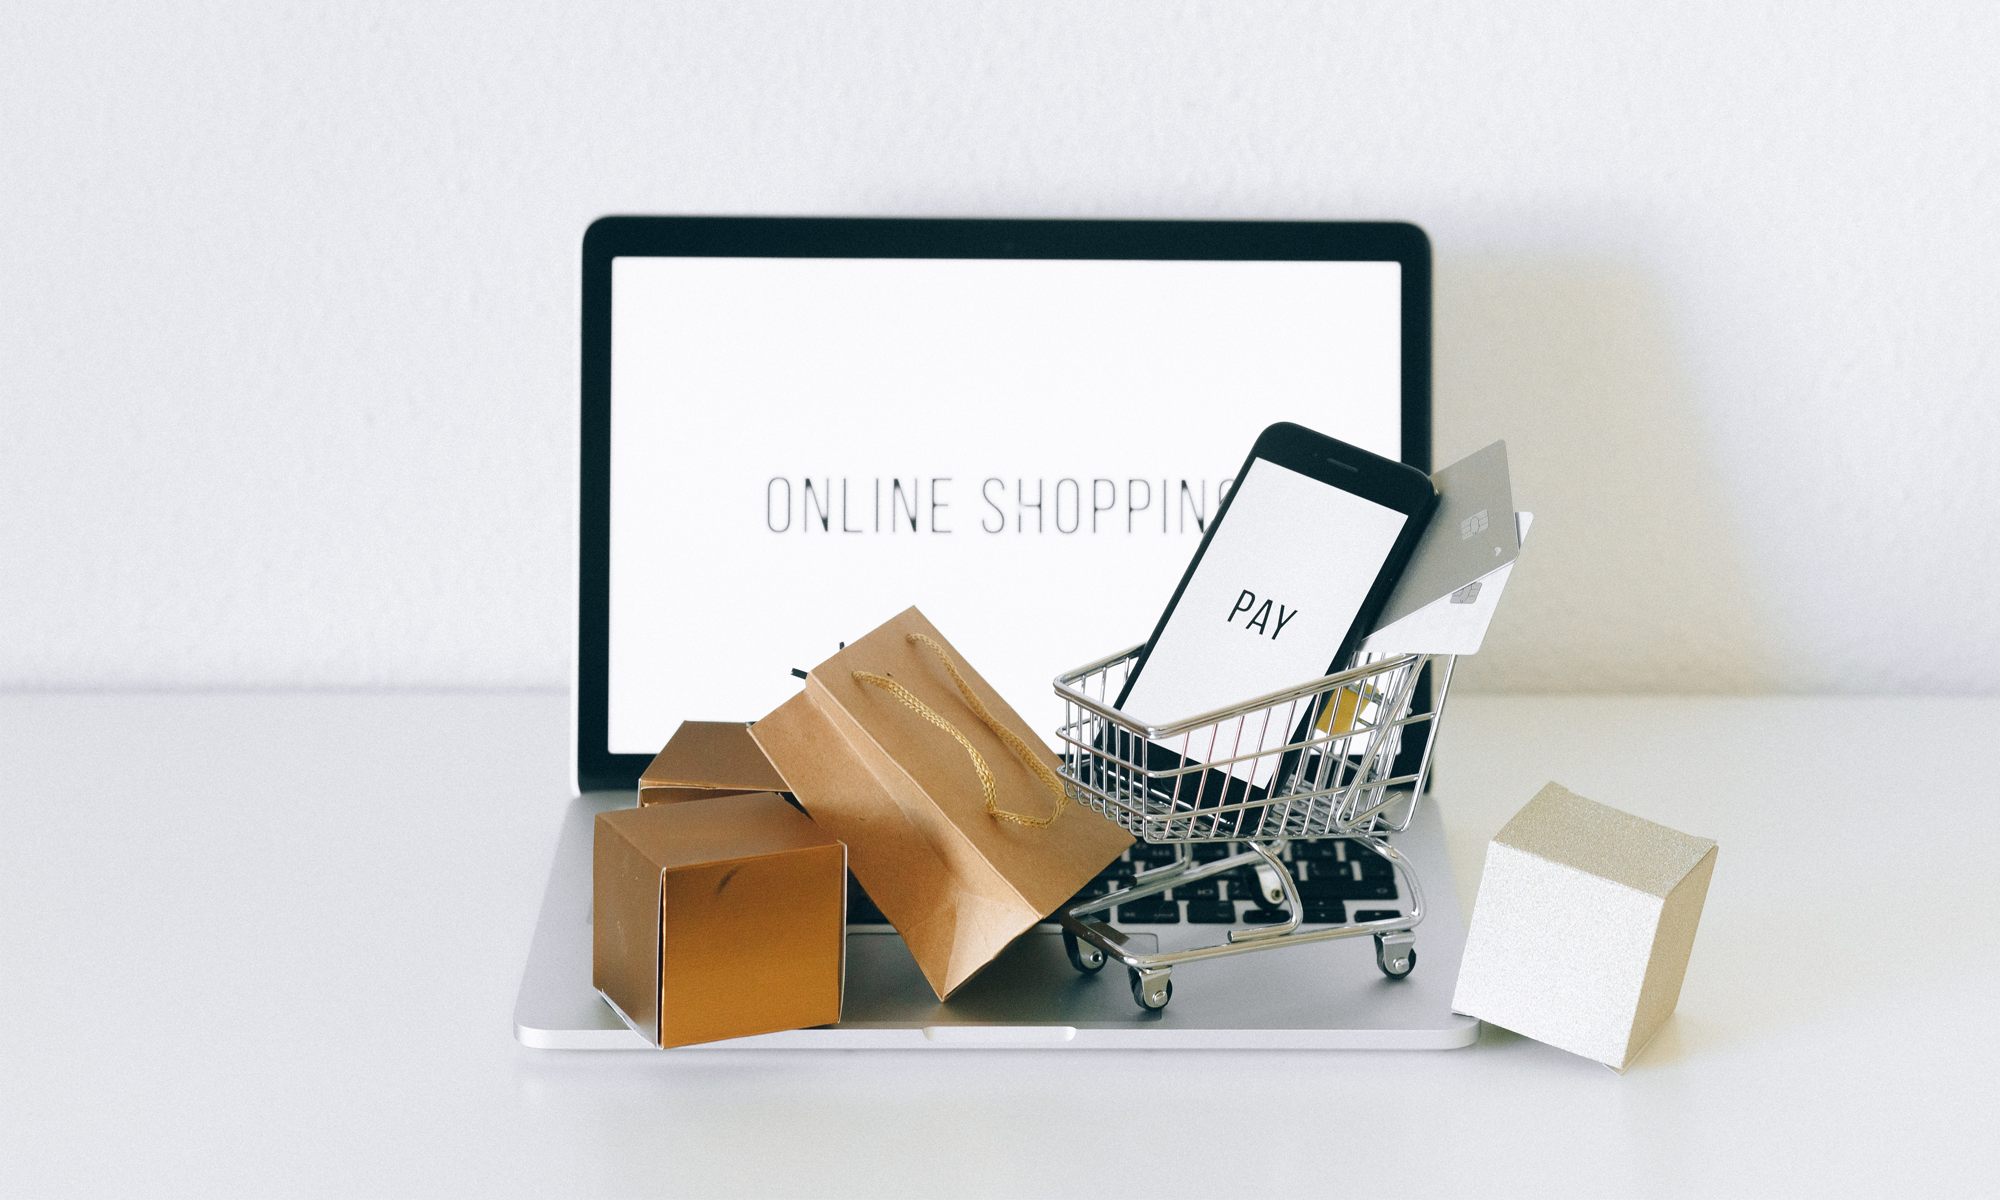 What is e-commerce?